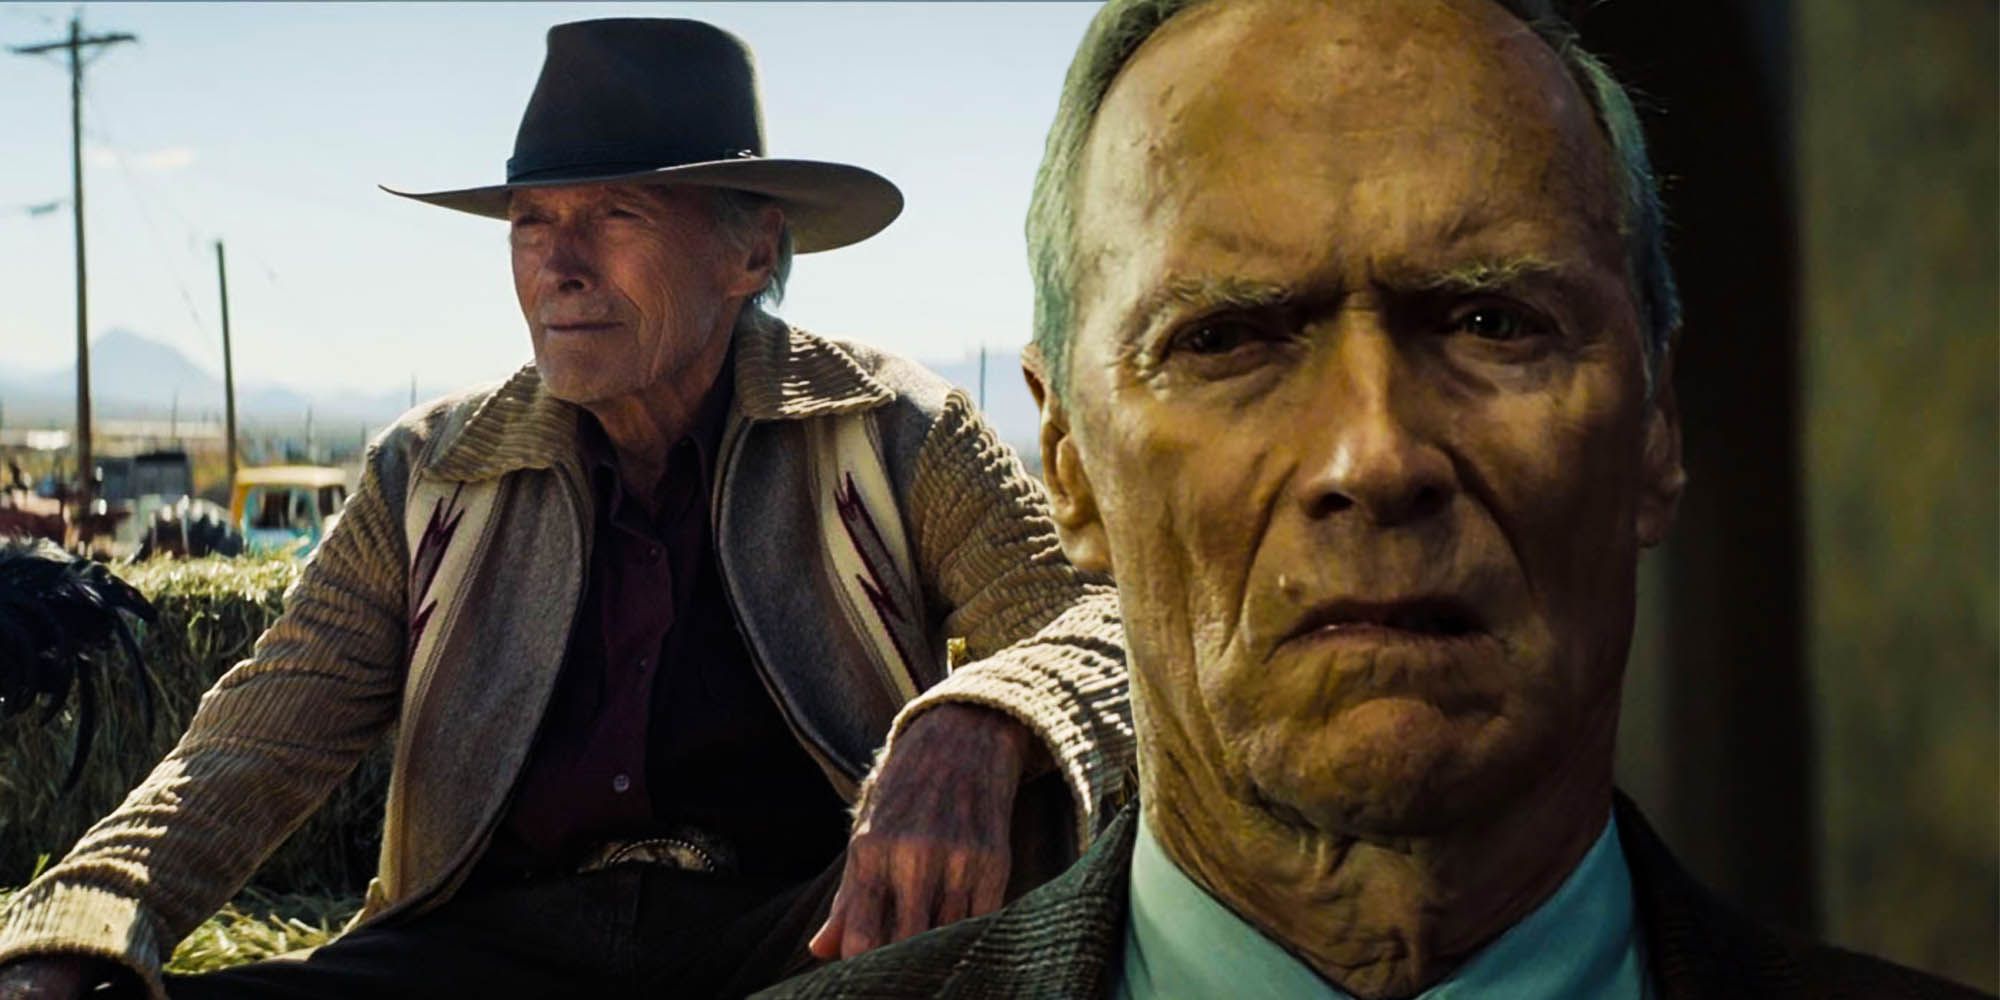 What Clint Eastwood's Next Movie Should Be (After Cry Macho)